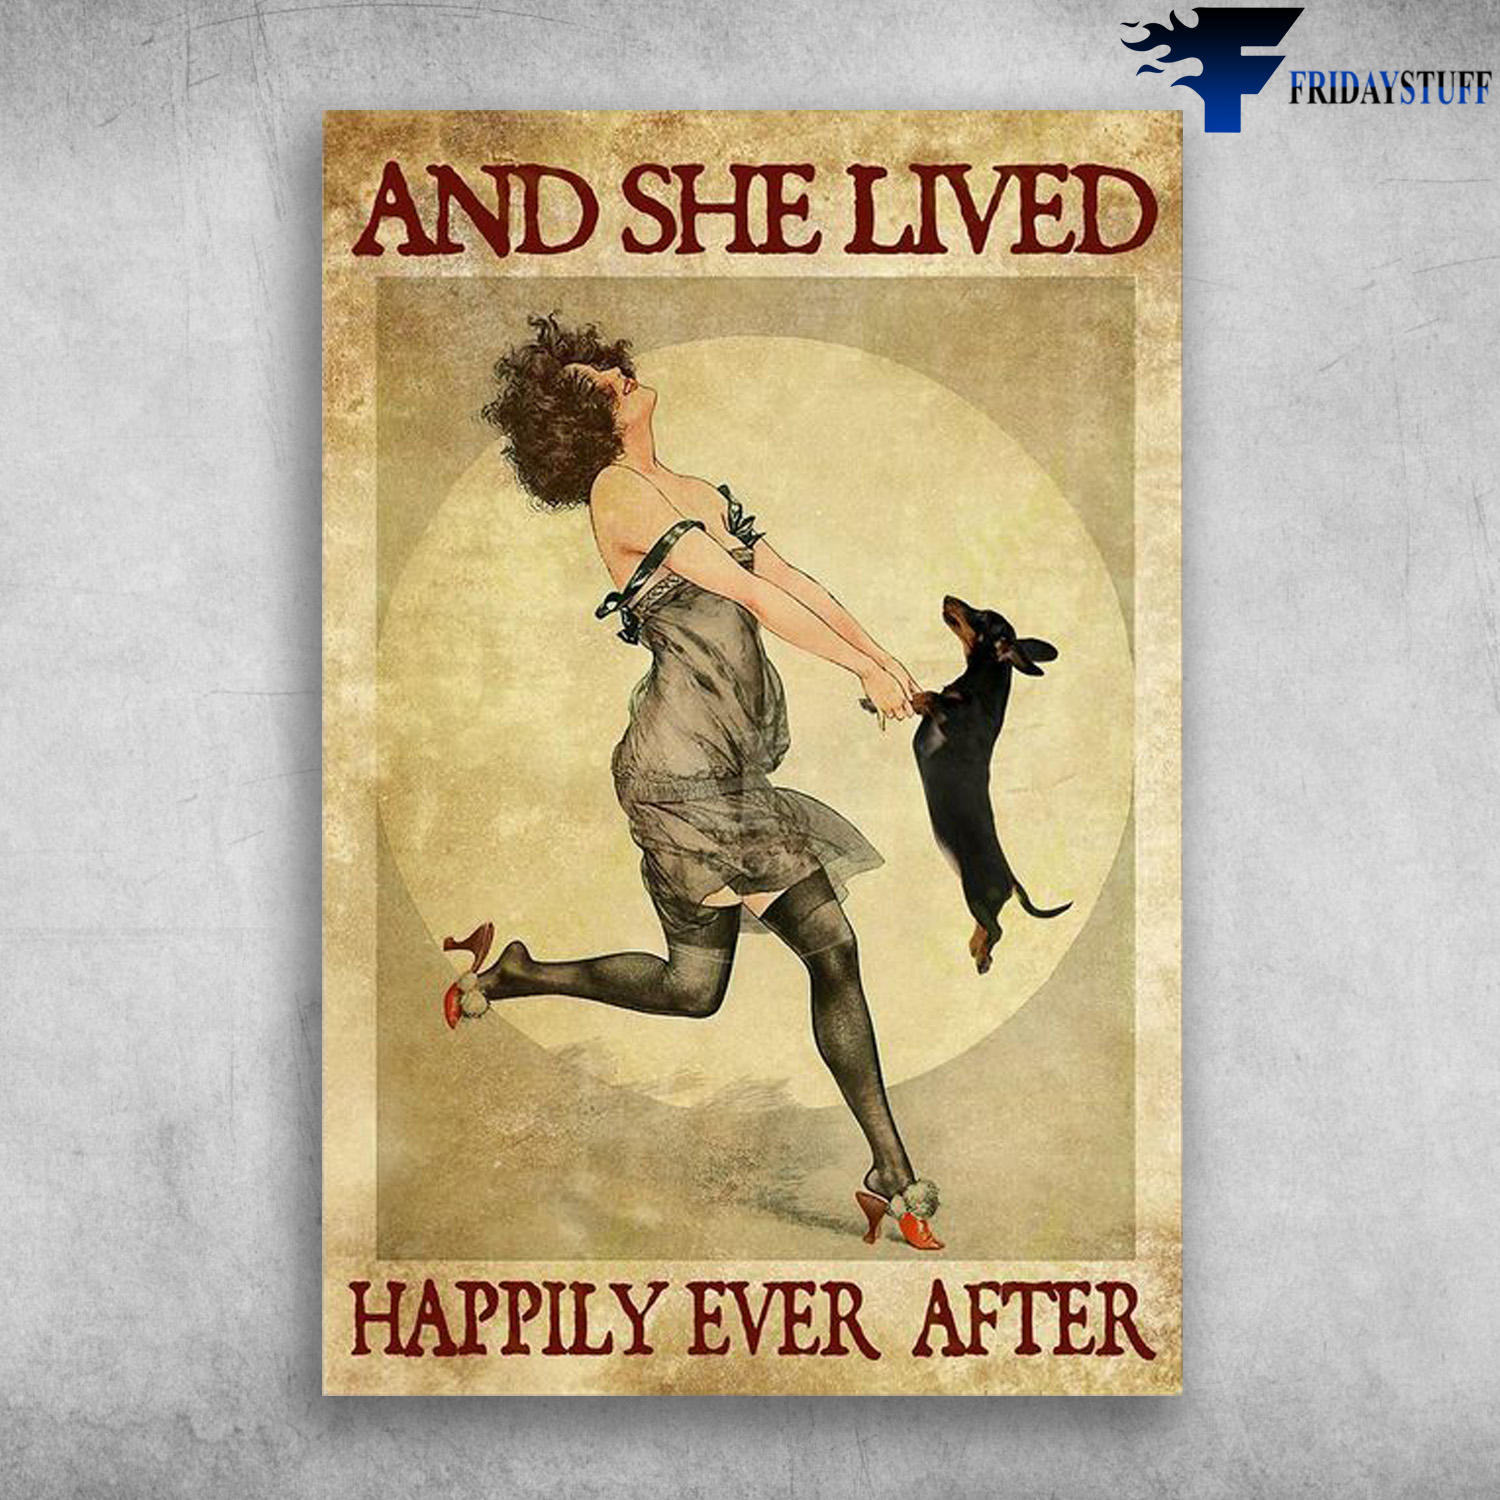 Girl Dancing With Dachshund - And She Lived, Happily Ever After